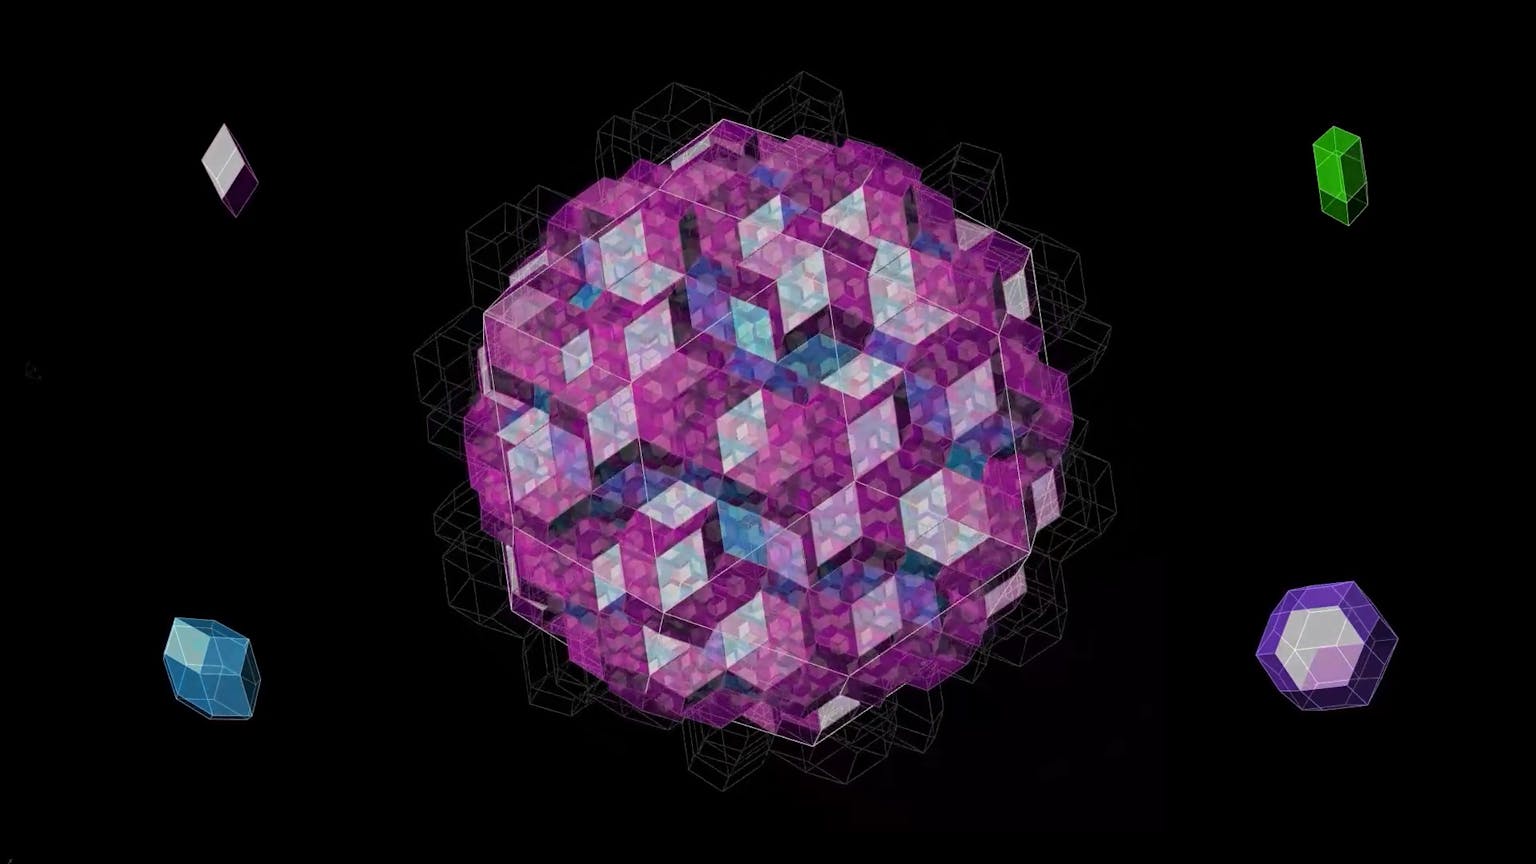 Image for entry 'Quasicrystals in an Age of Digital Design'